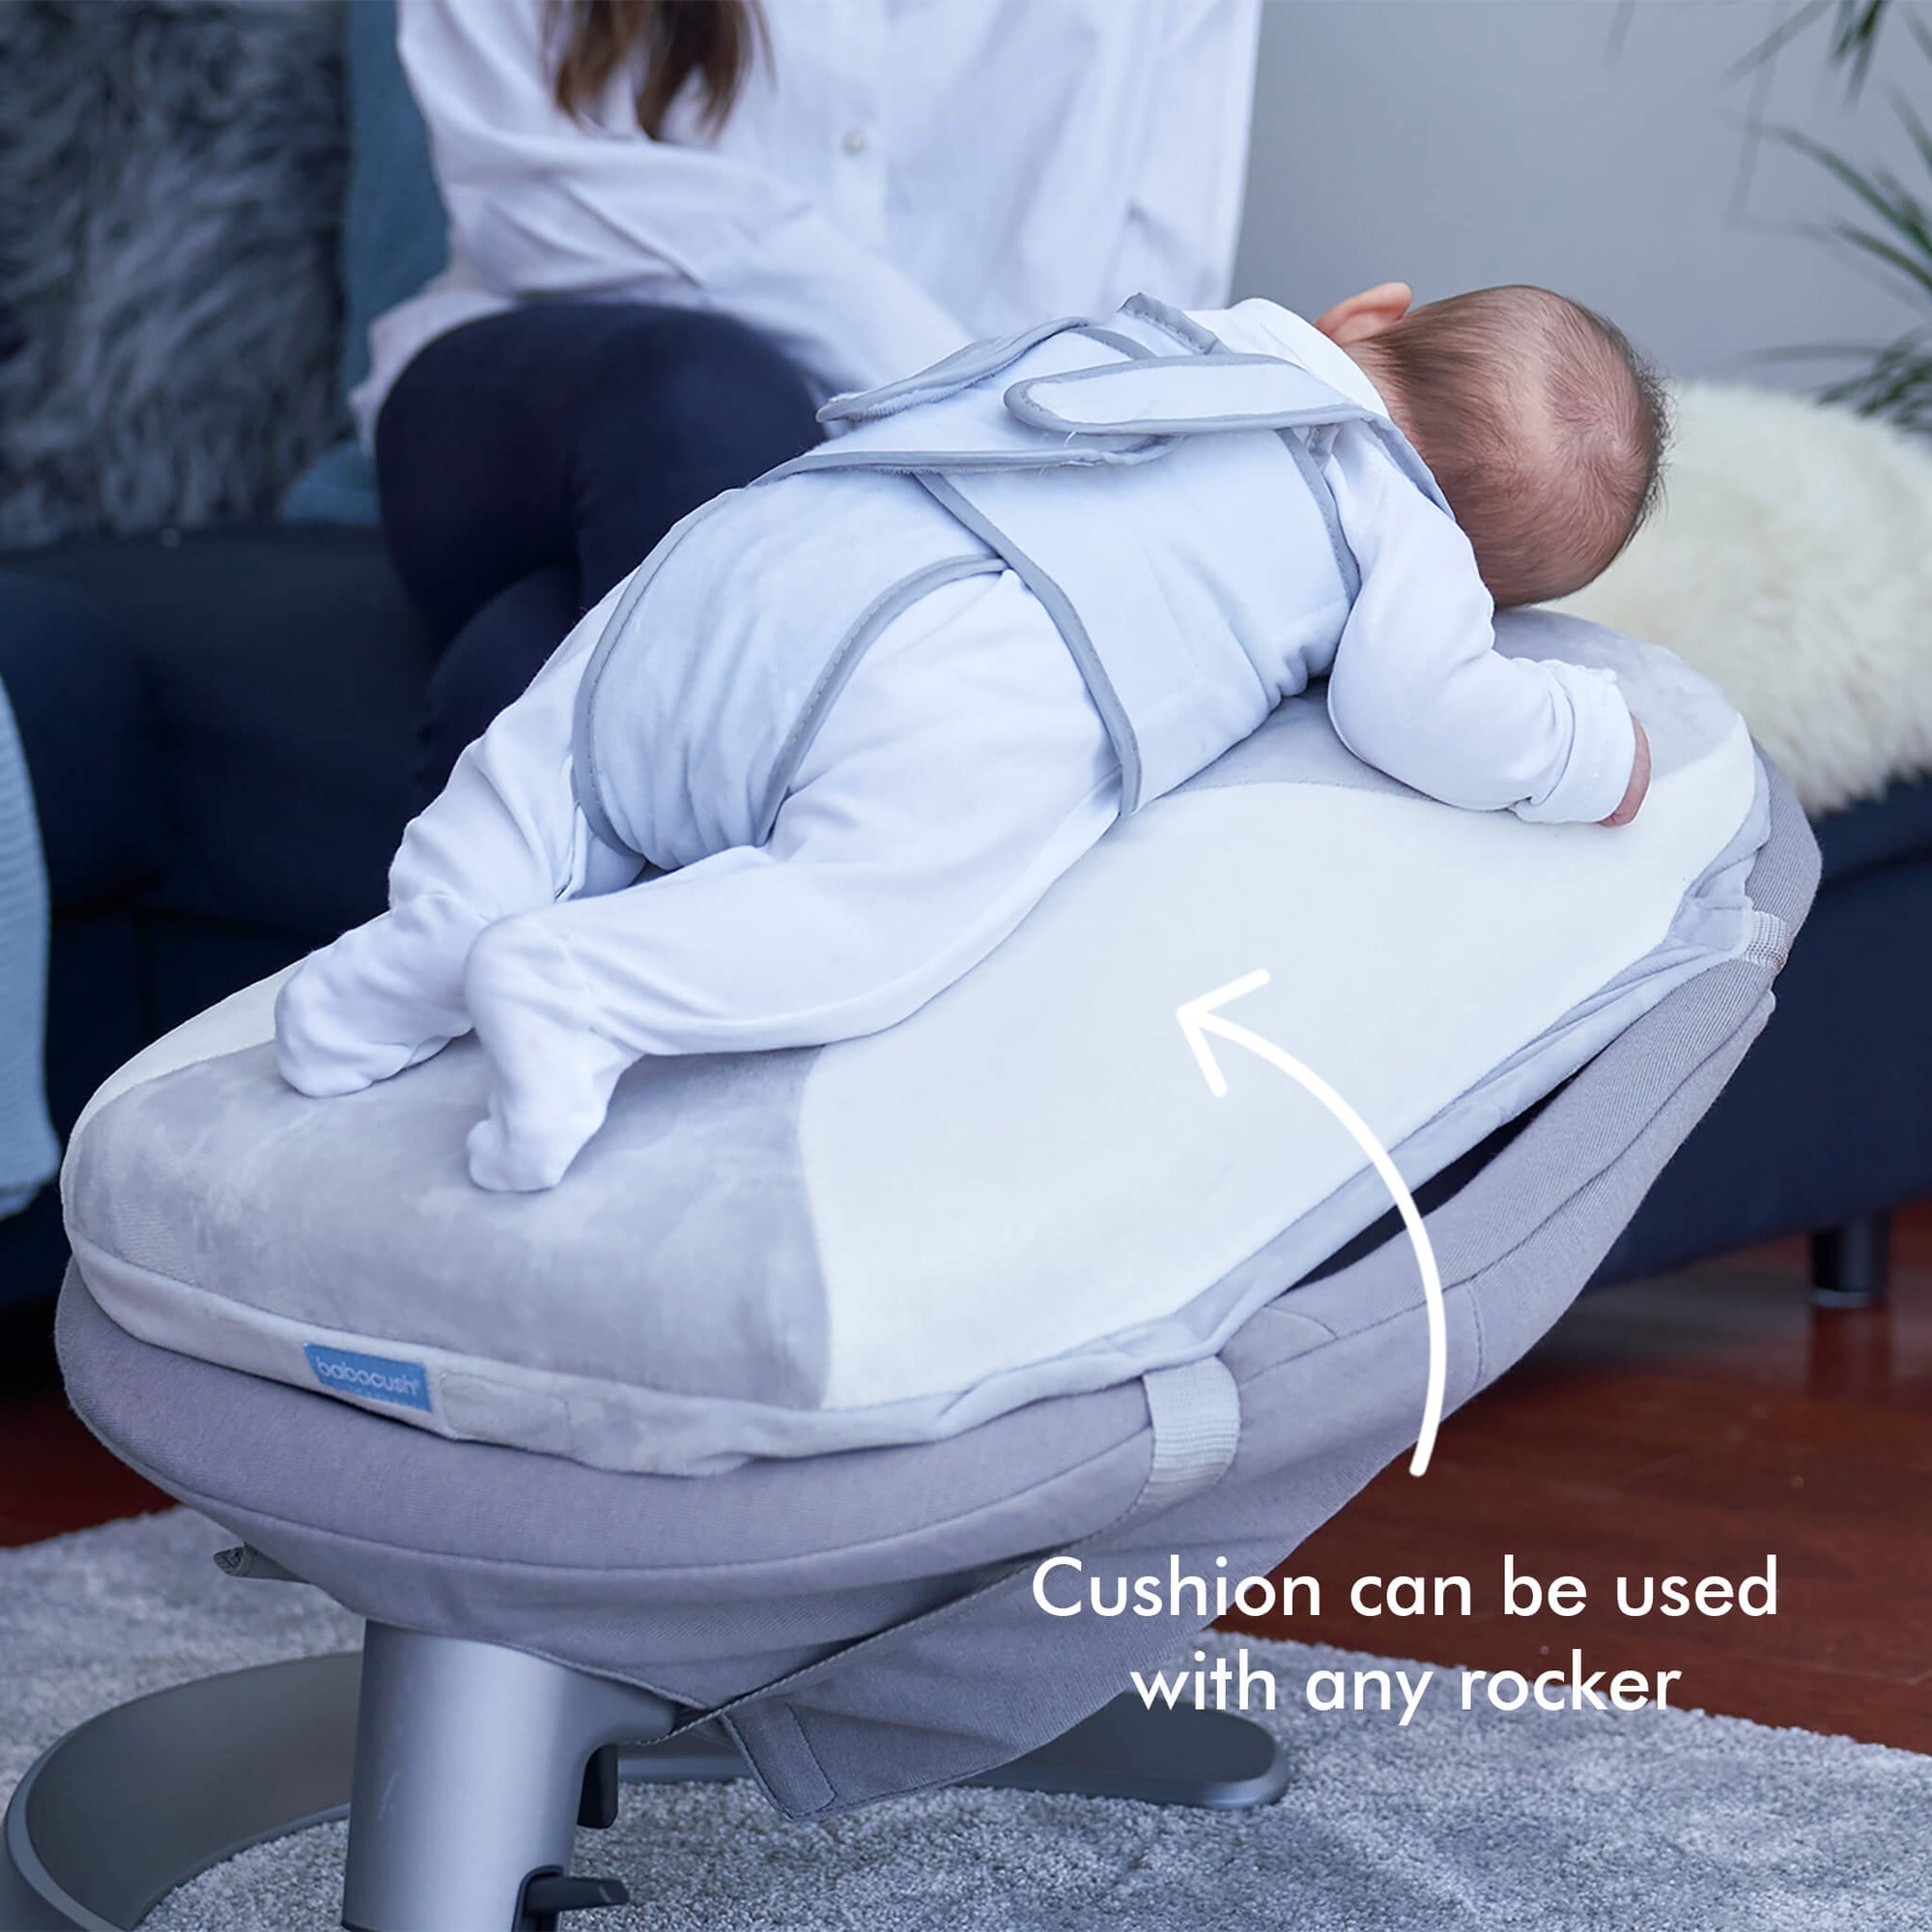 Babocush cushion can be used with any rocker